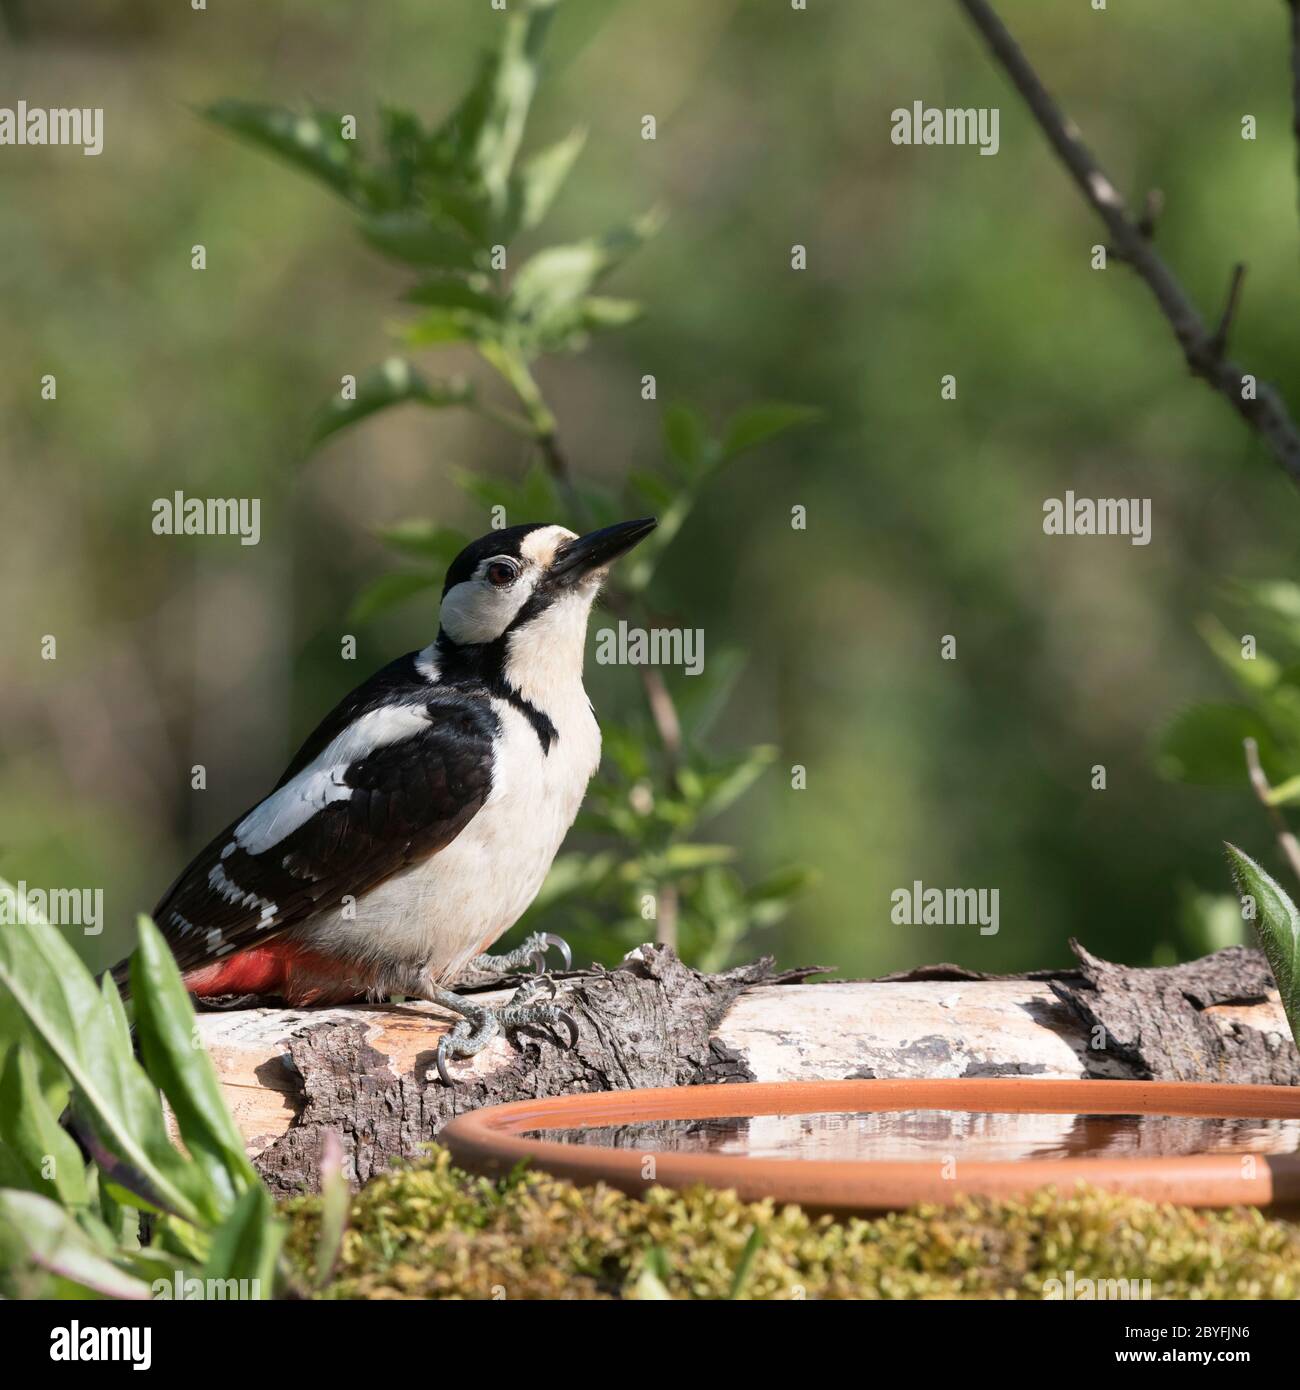 An Adult Female Great Spotted Woodpecker (Dendrocopos Major) Perched Beside a Garden Birdbath Stock Photo